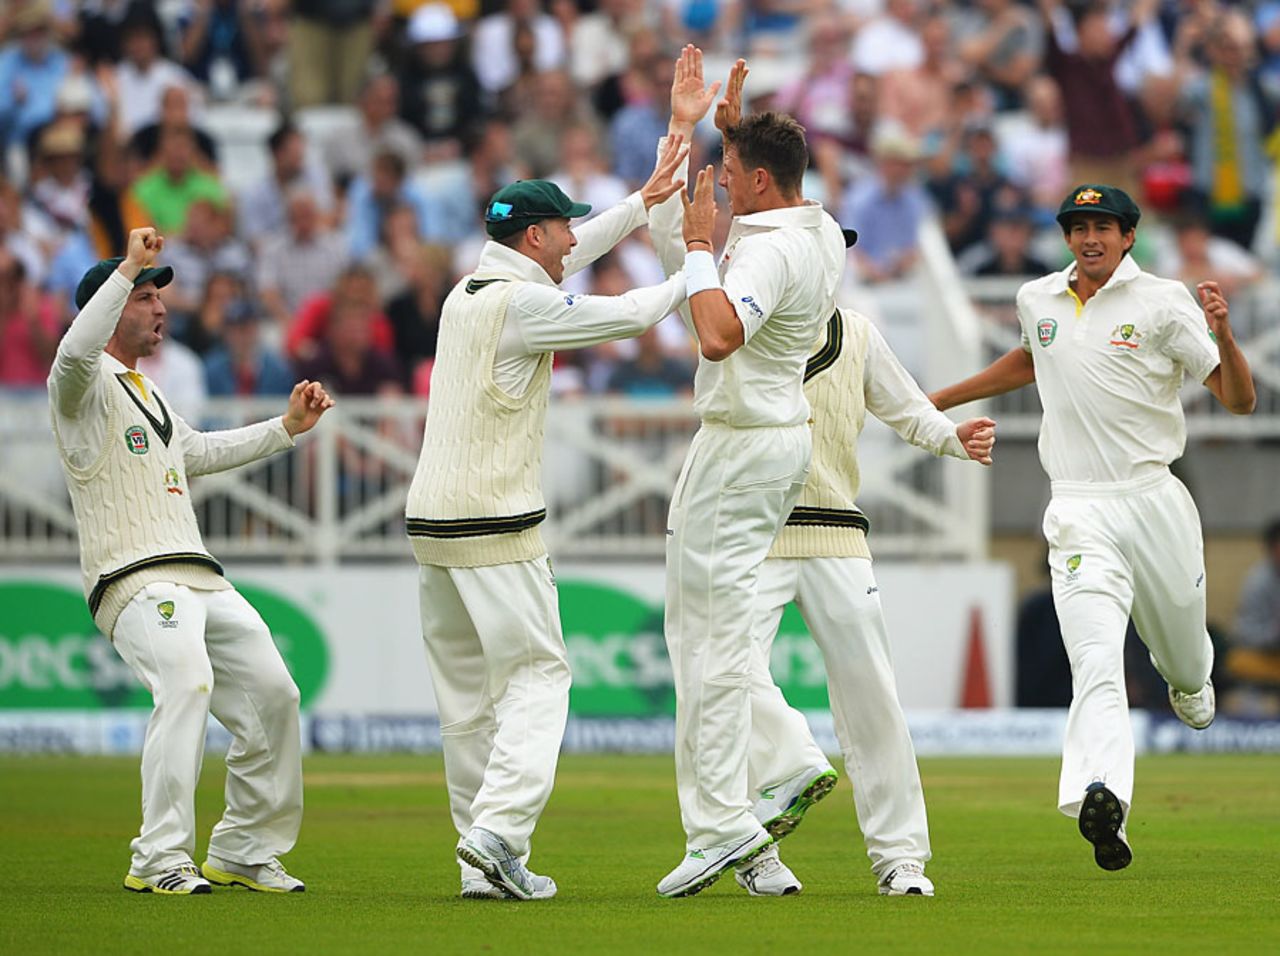 Australia celebrate the early wicket of Alastair Cook, England v Australia, 1st Investec Test, Trent Bridge, 1st day, July 10, 2013